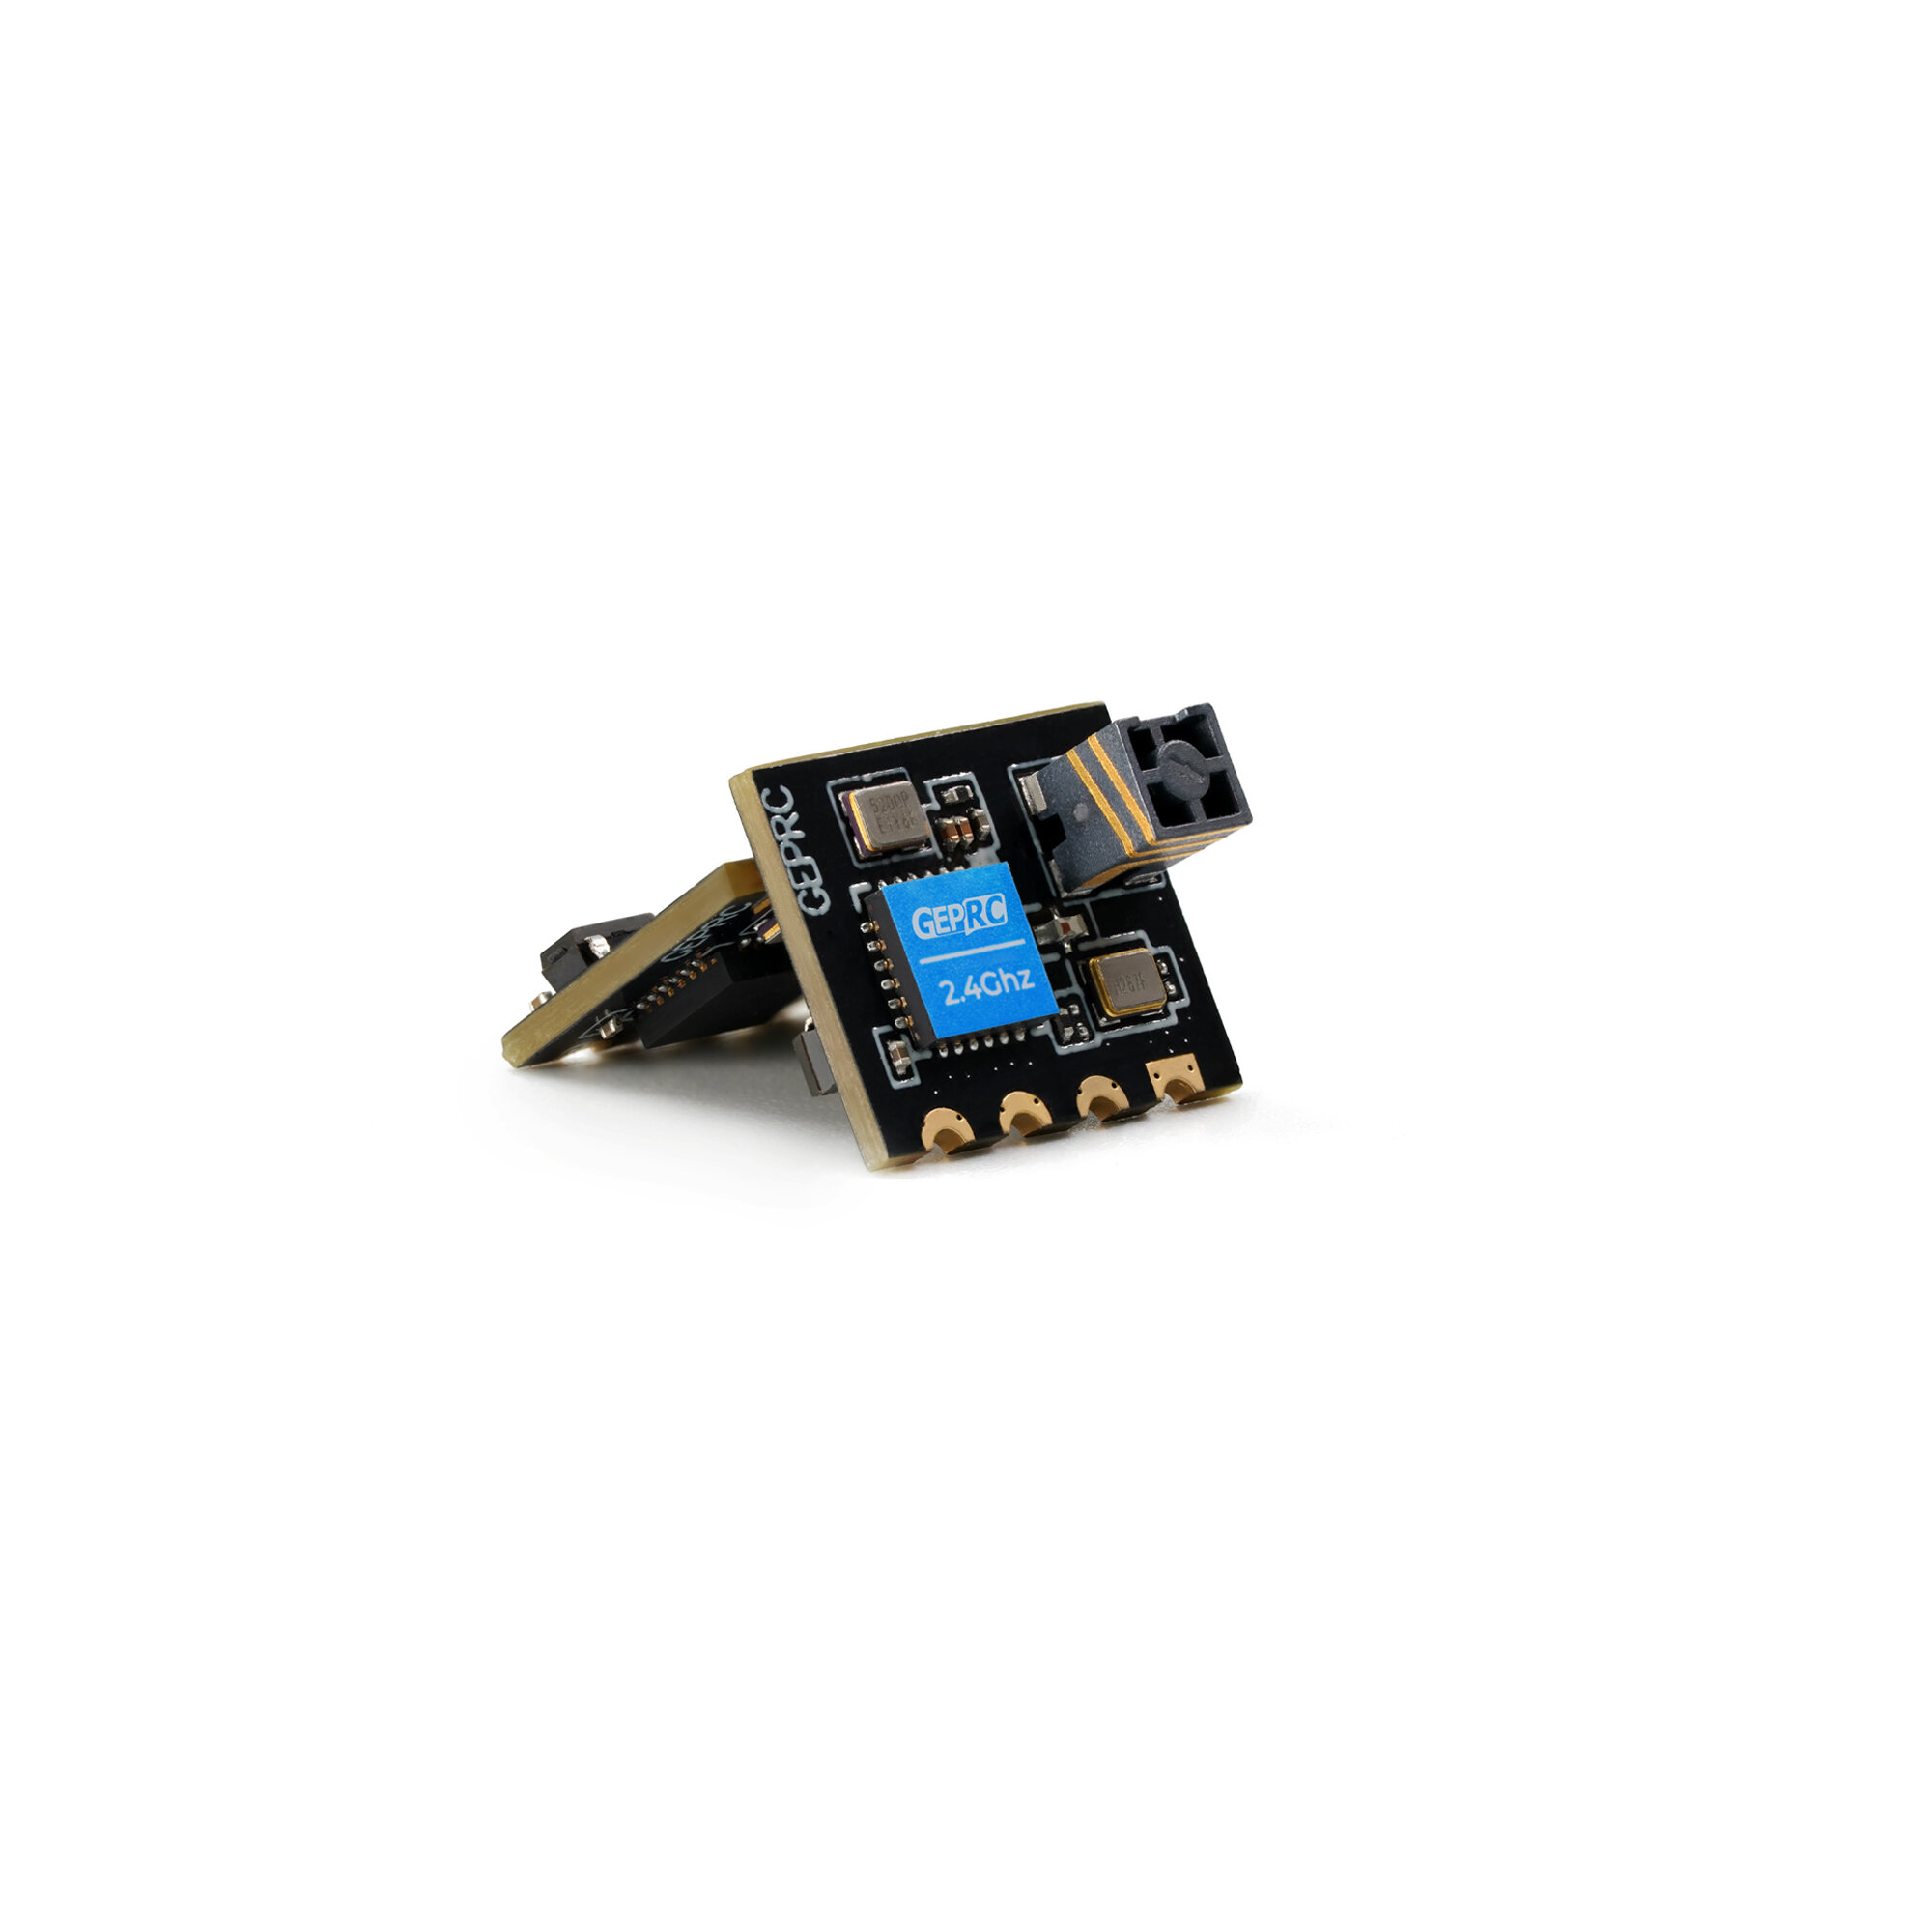 

0.4g GEPRC ExpressLRS ELRS 2.4GHz NanoSE Low Latency Long Range 500Hz Refresh Rate Mini RC Receiver for RC Drone